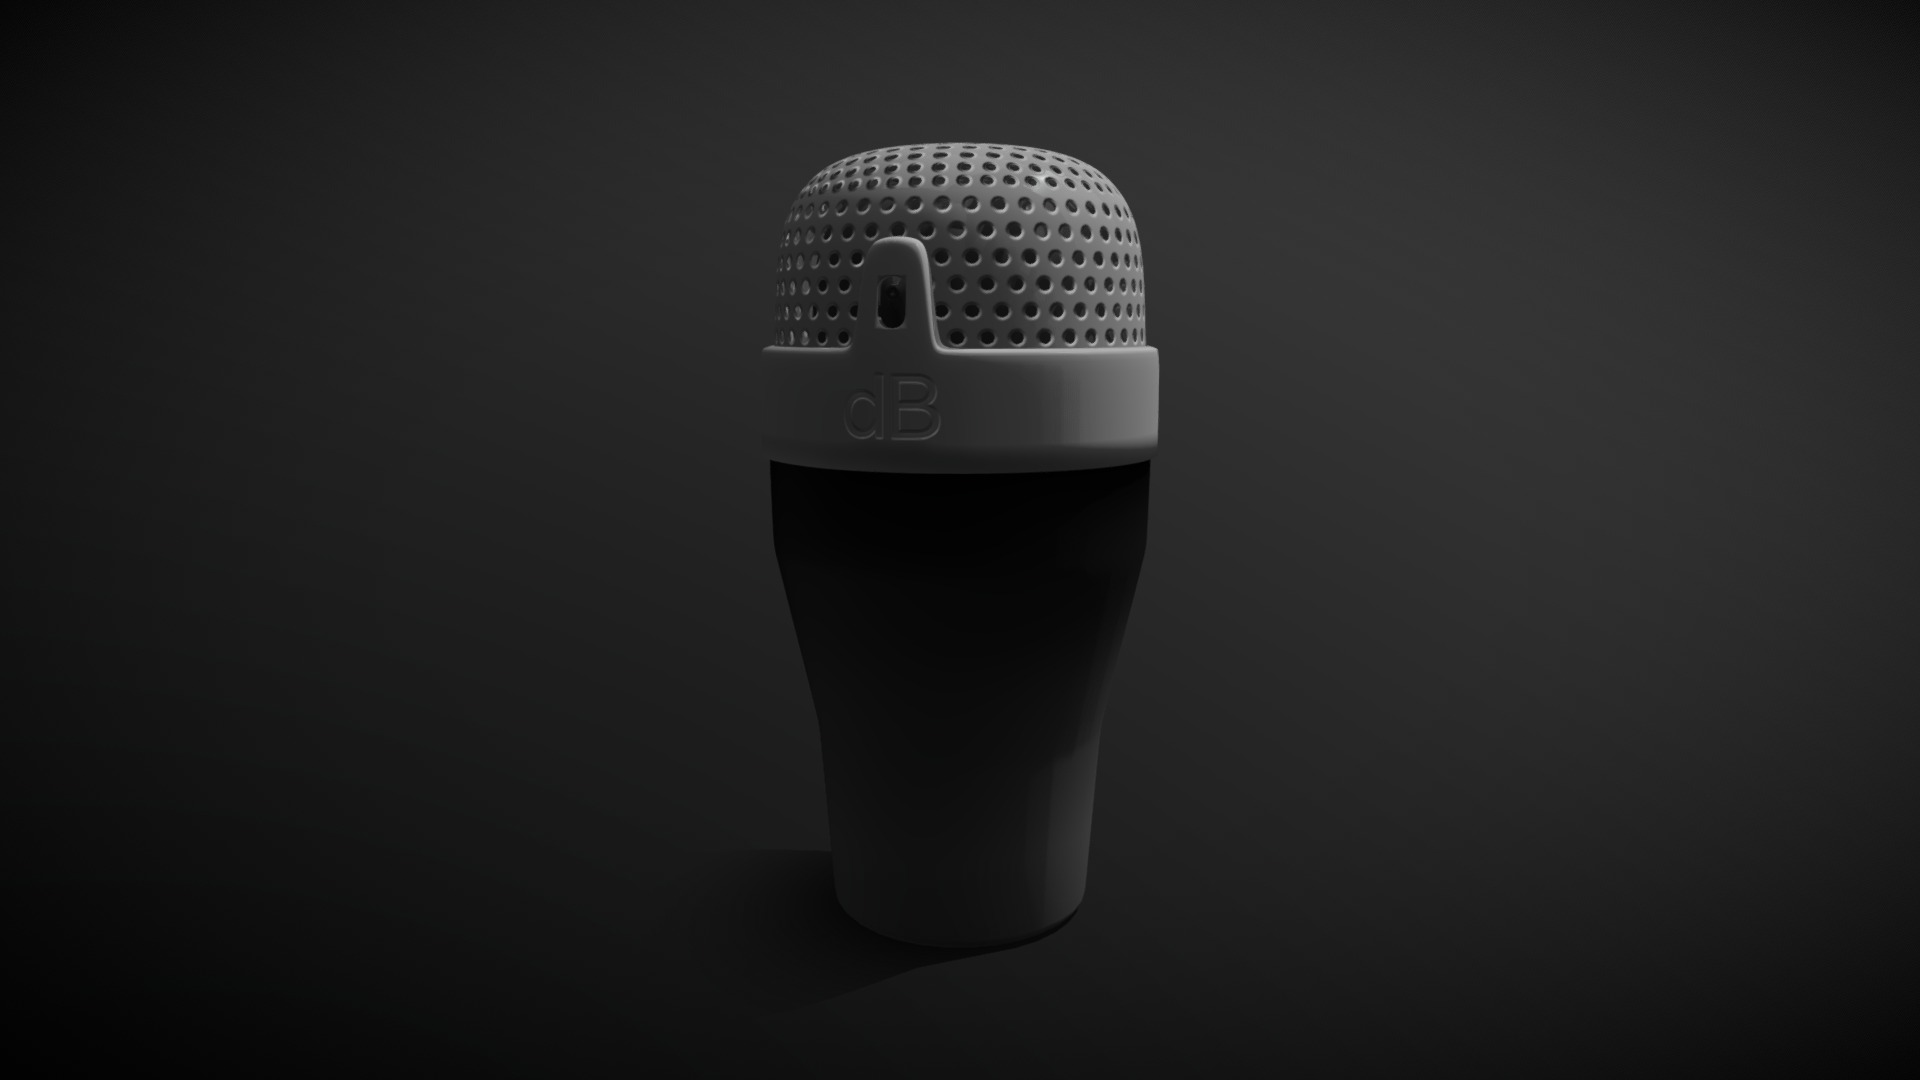 3D model Decibel by Azzaro - This is a 3D model of the Decibel by Azzaro. The 3D model is about a white cylindrical object with a white button on it.